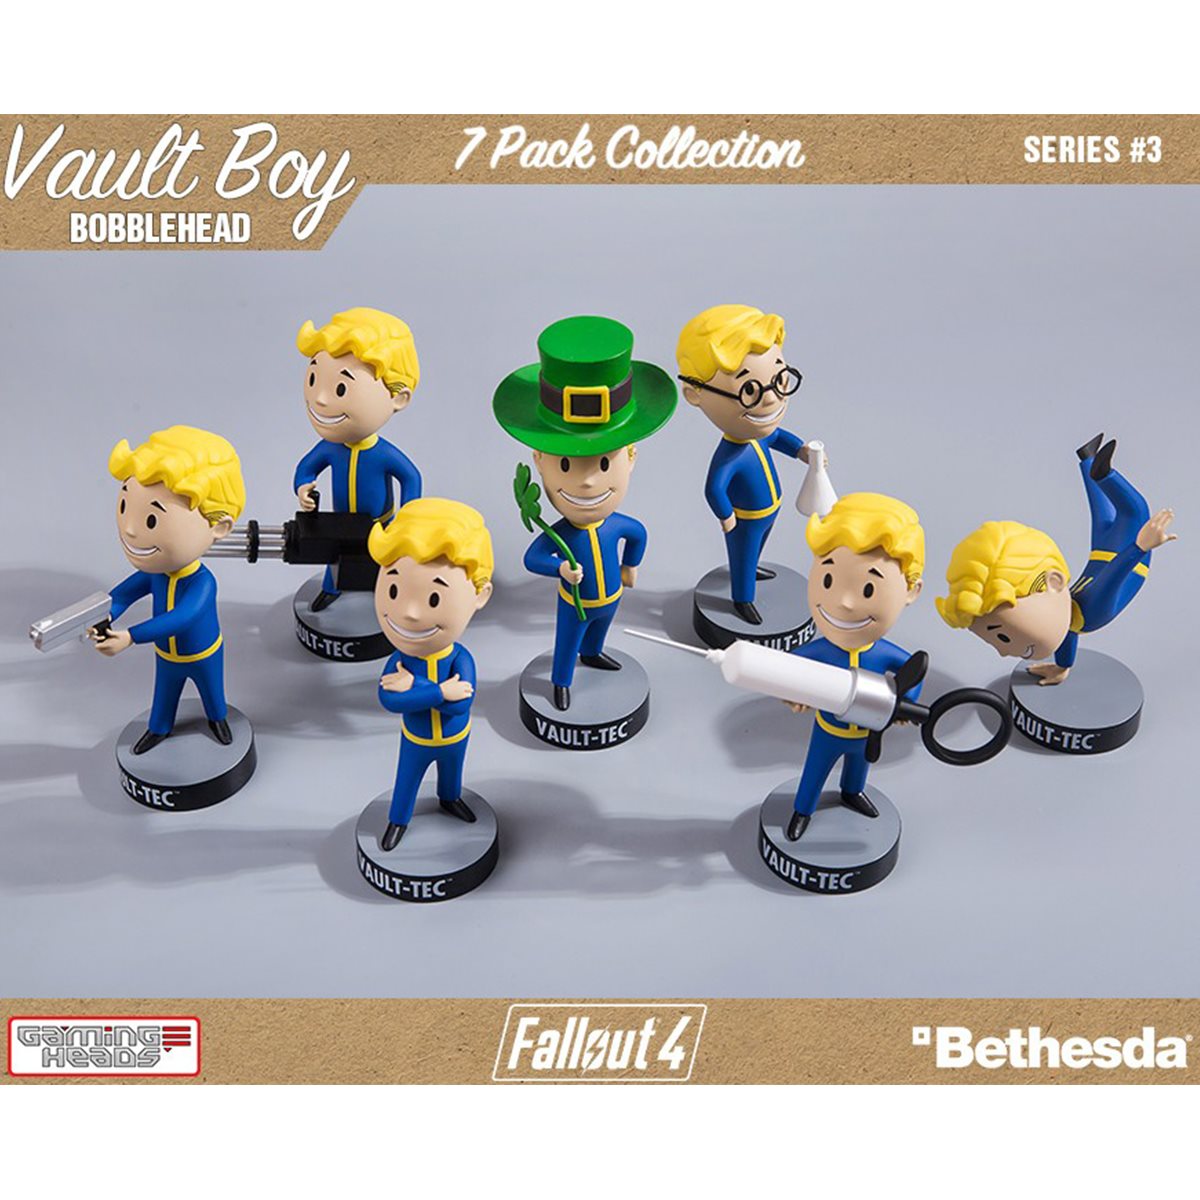 The bobbleheads in fallout 4 фото 54